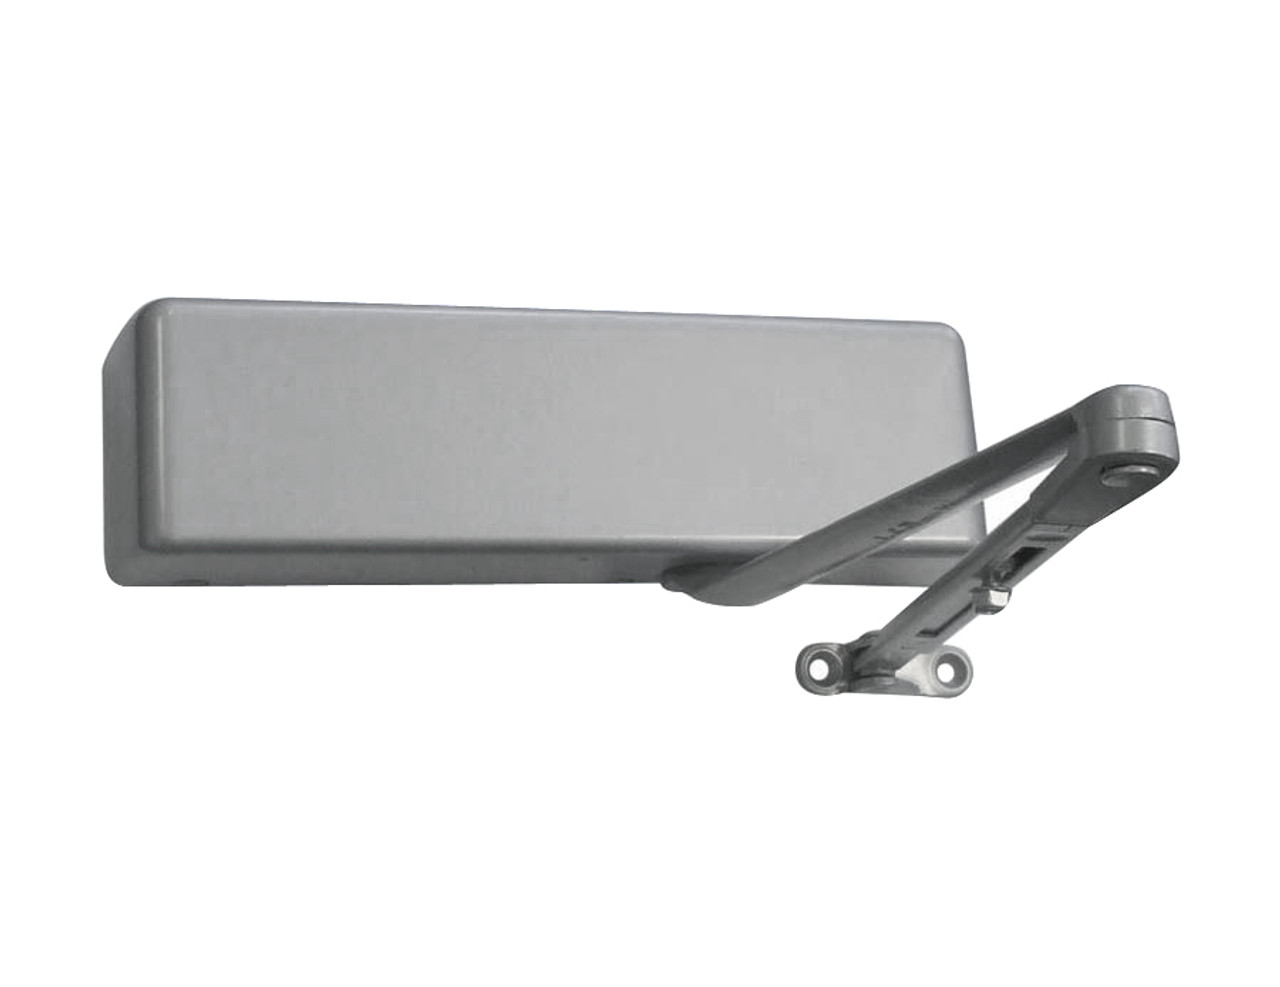 4026-LONG-LH-US26D LCN Door Closer with Long Arm in Satin Chrome Finish